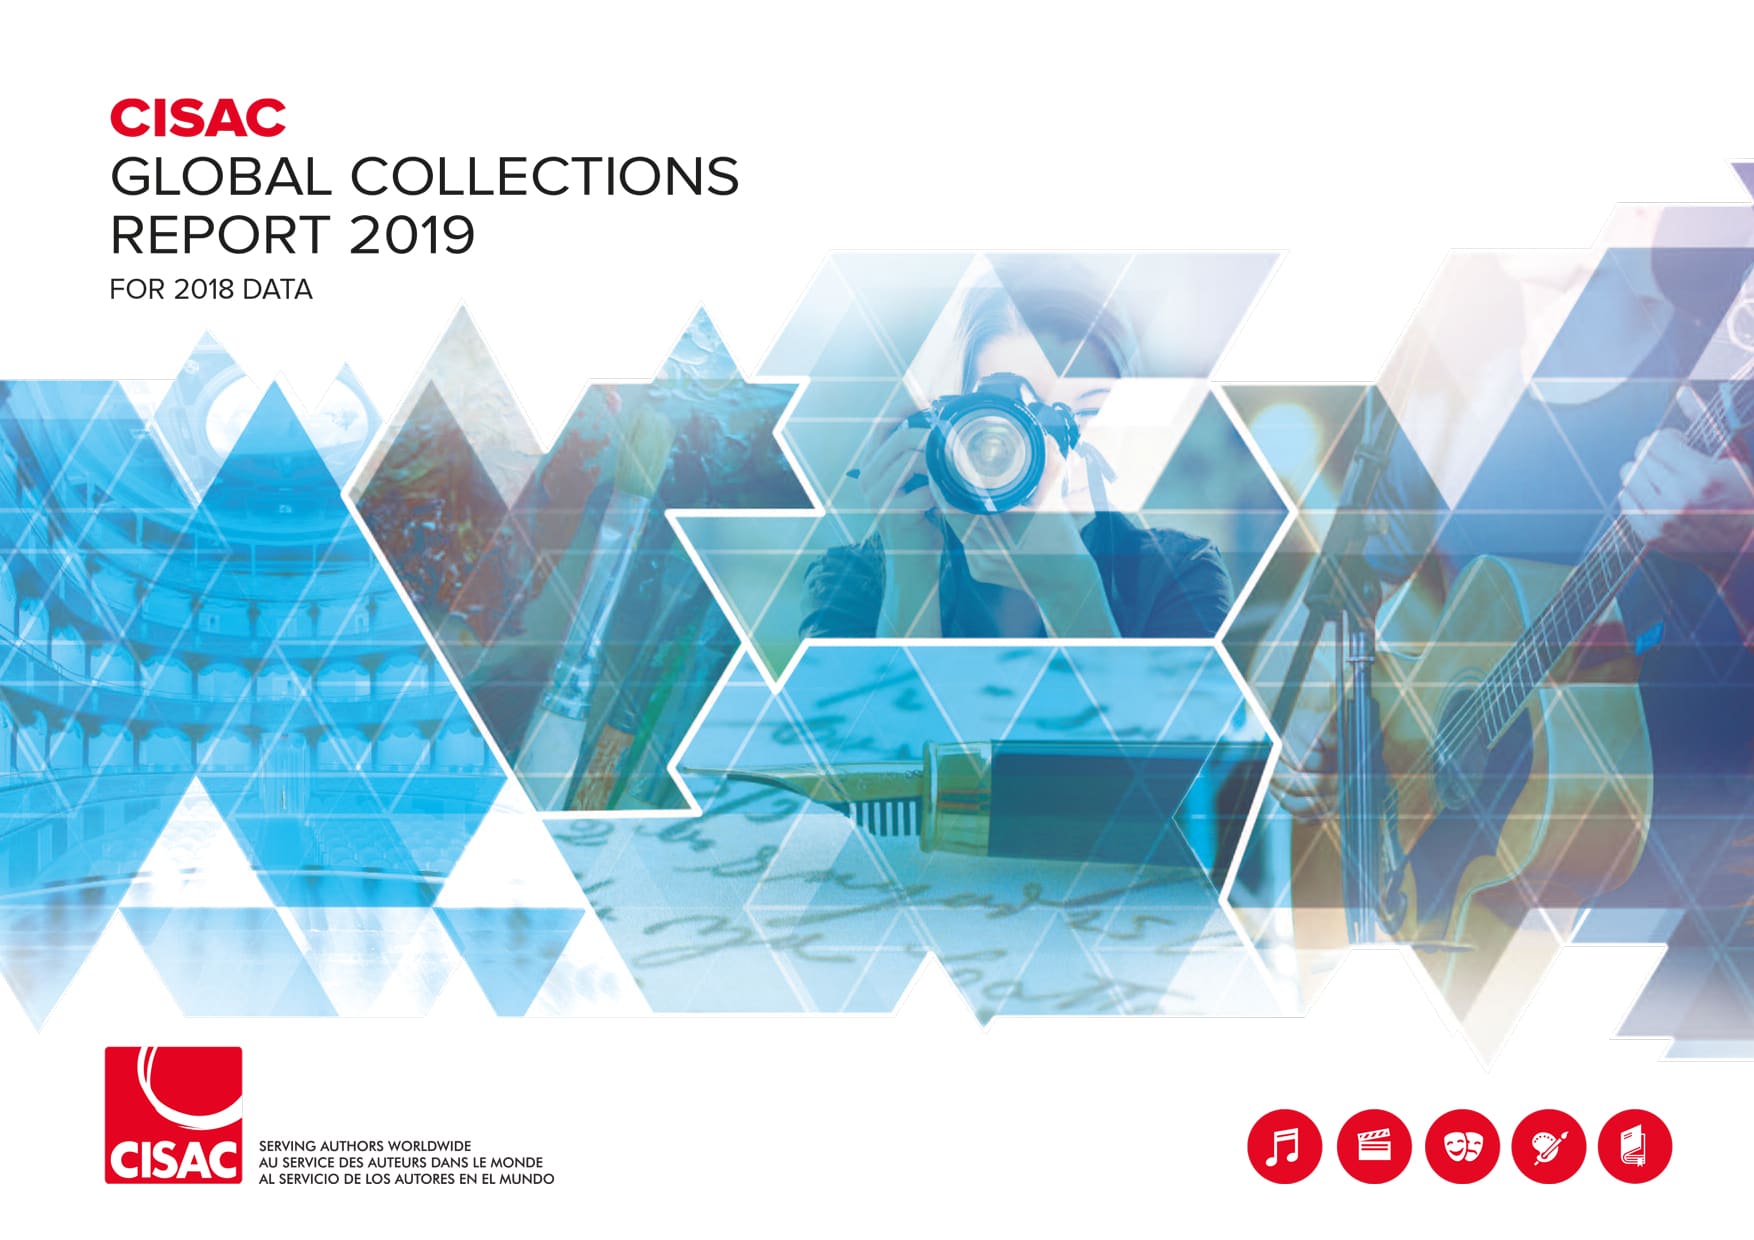 Launch of CISAC Global Collections Report 2019